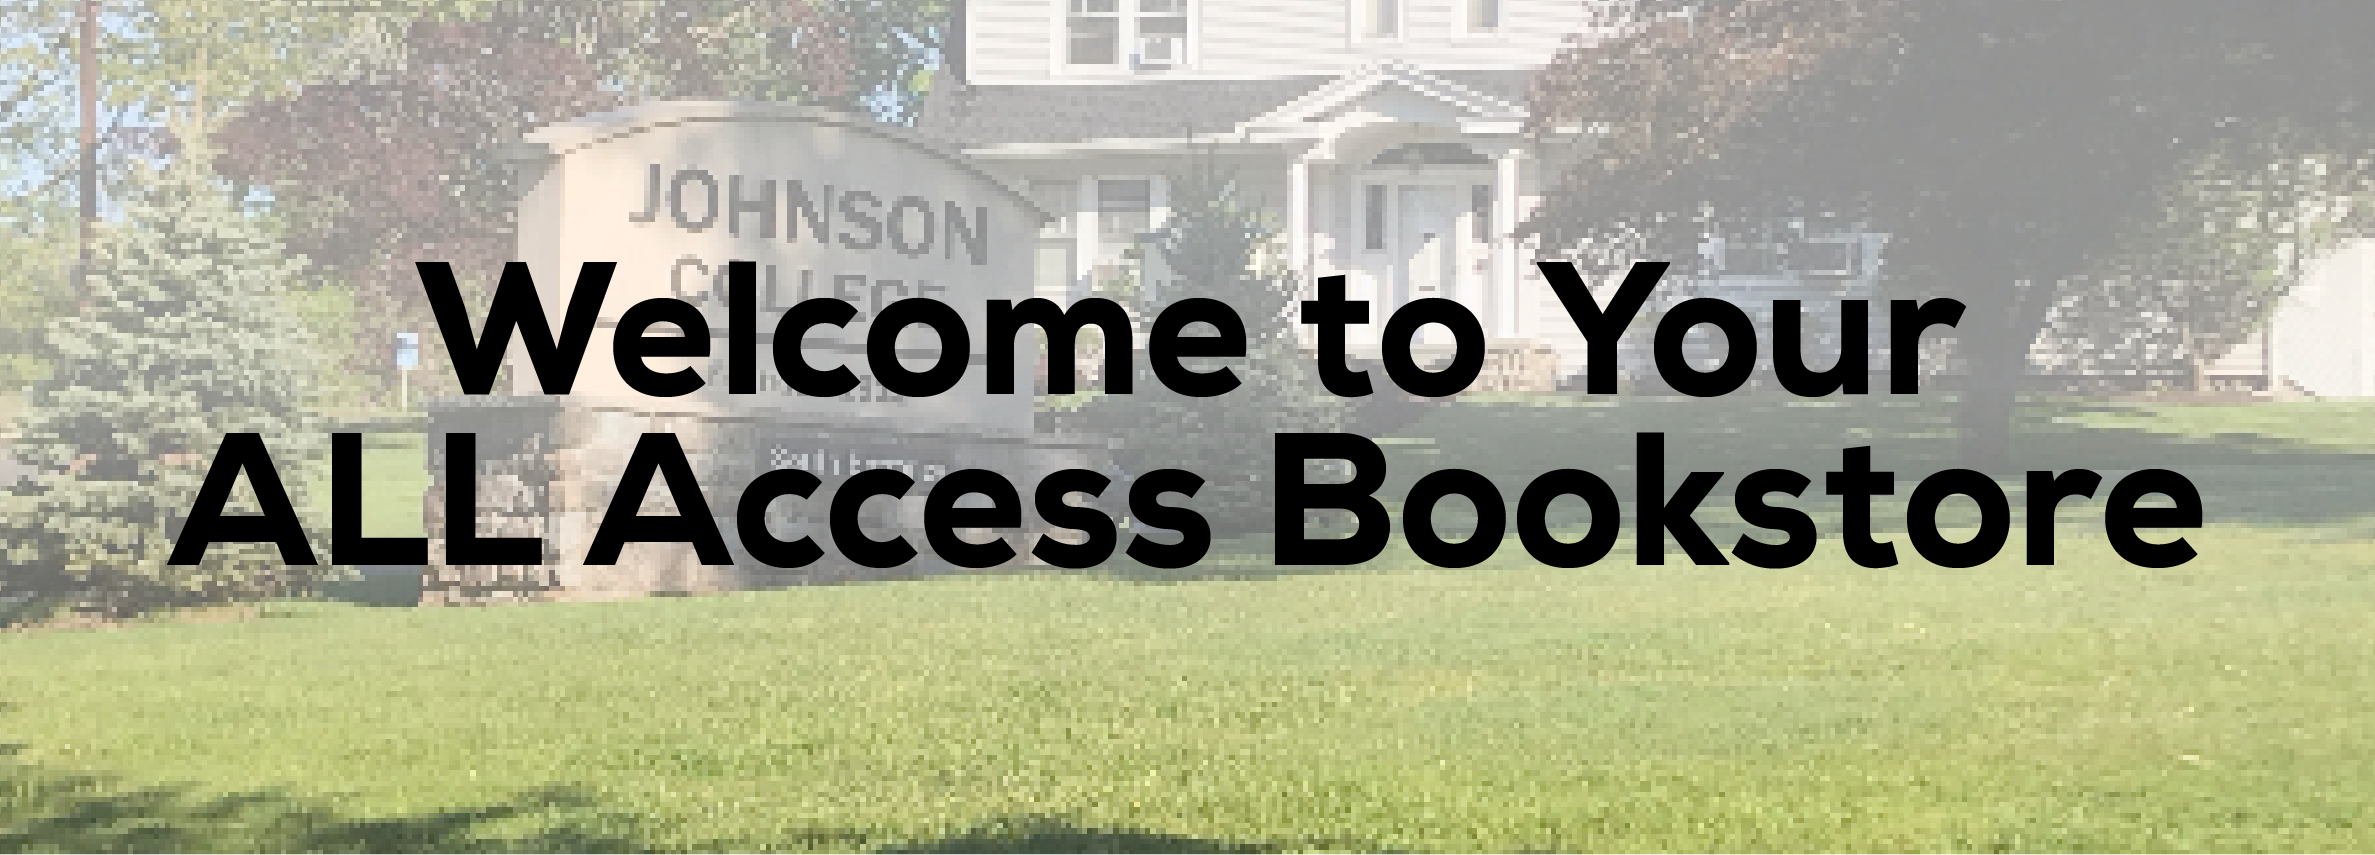 Welcome to Your ALL Access Bookstore